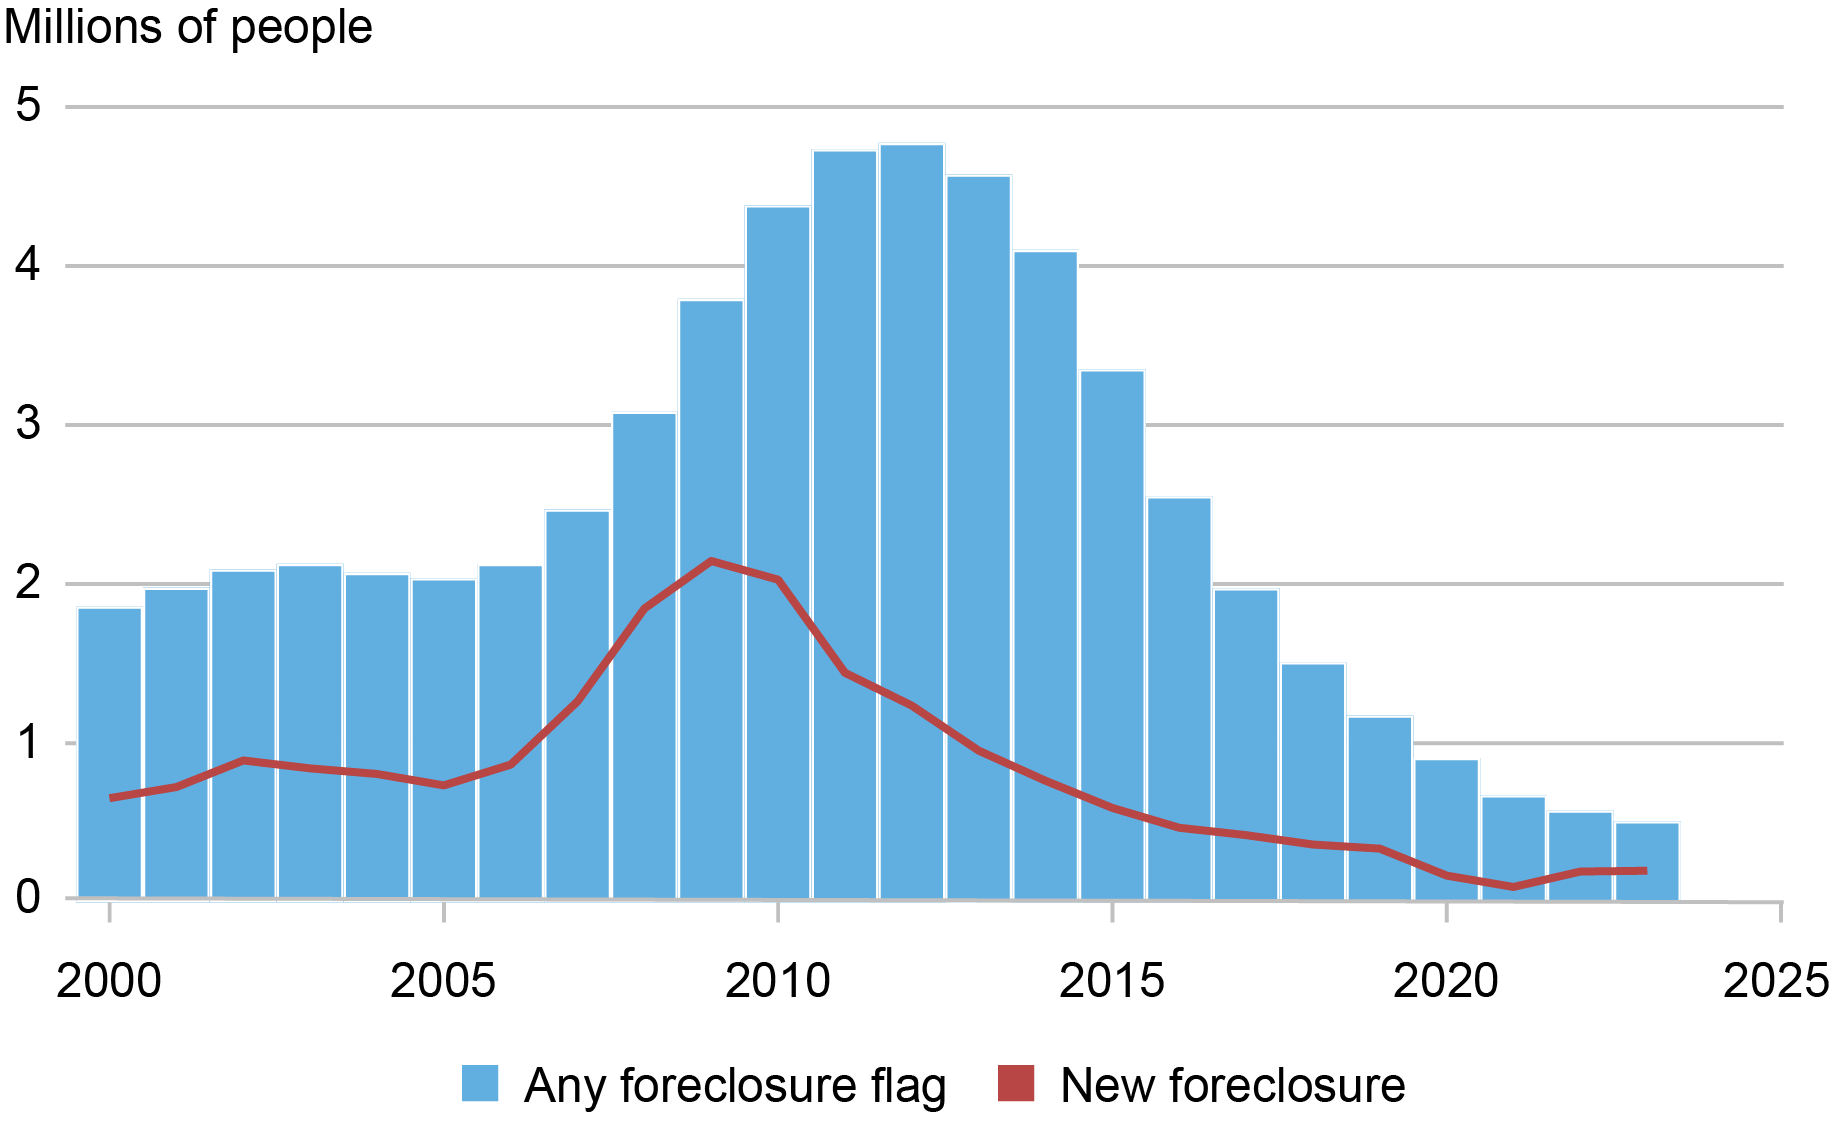 Alt=”line and bar chart showing new foreclosures (red line) and any foreclosure flags (blue bar) by millions of people from 2000 to 2023” 